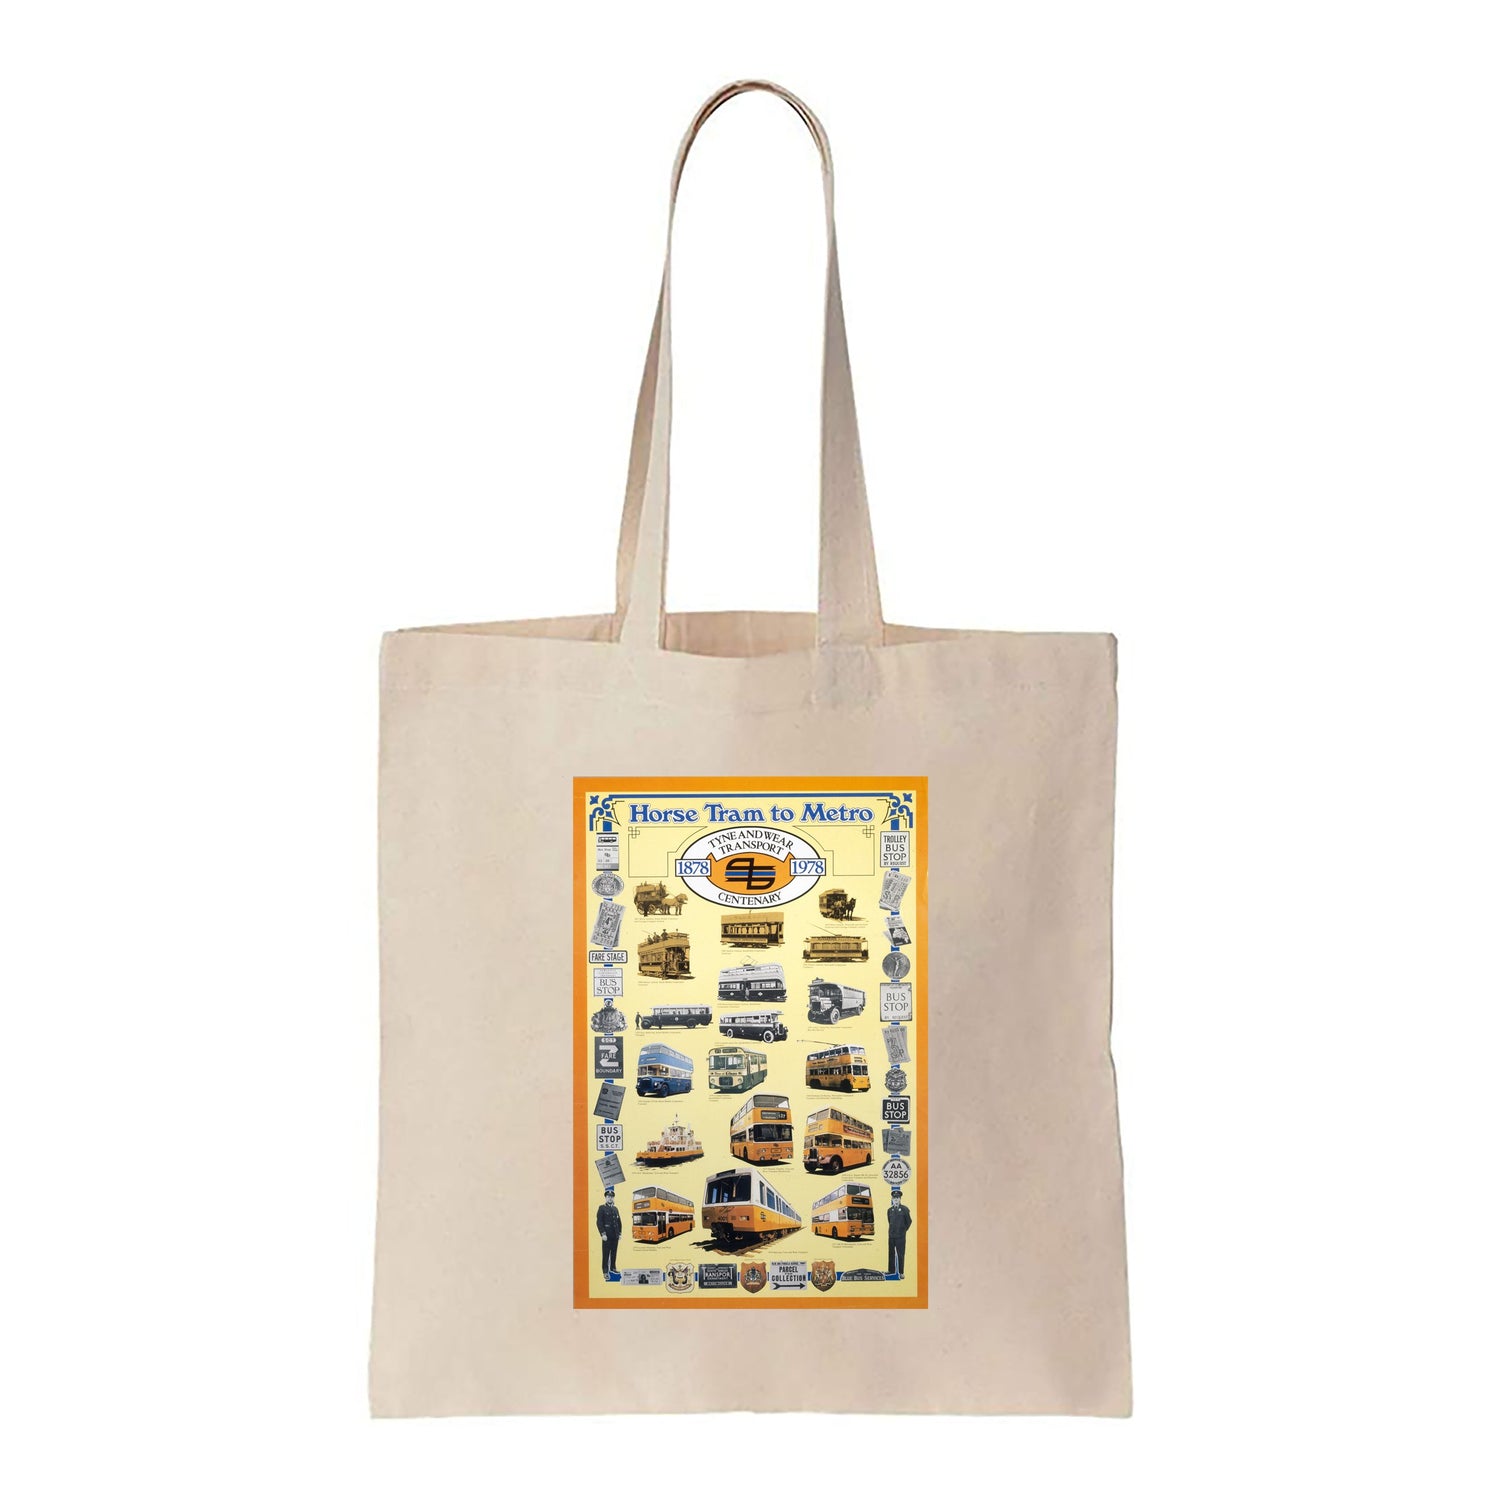 Horse Tram to Metro, Tyne and Wear Transport Centenary - Canvas Tote Bag